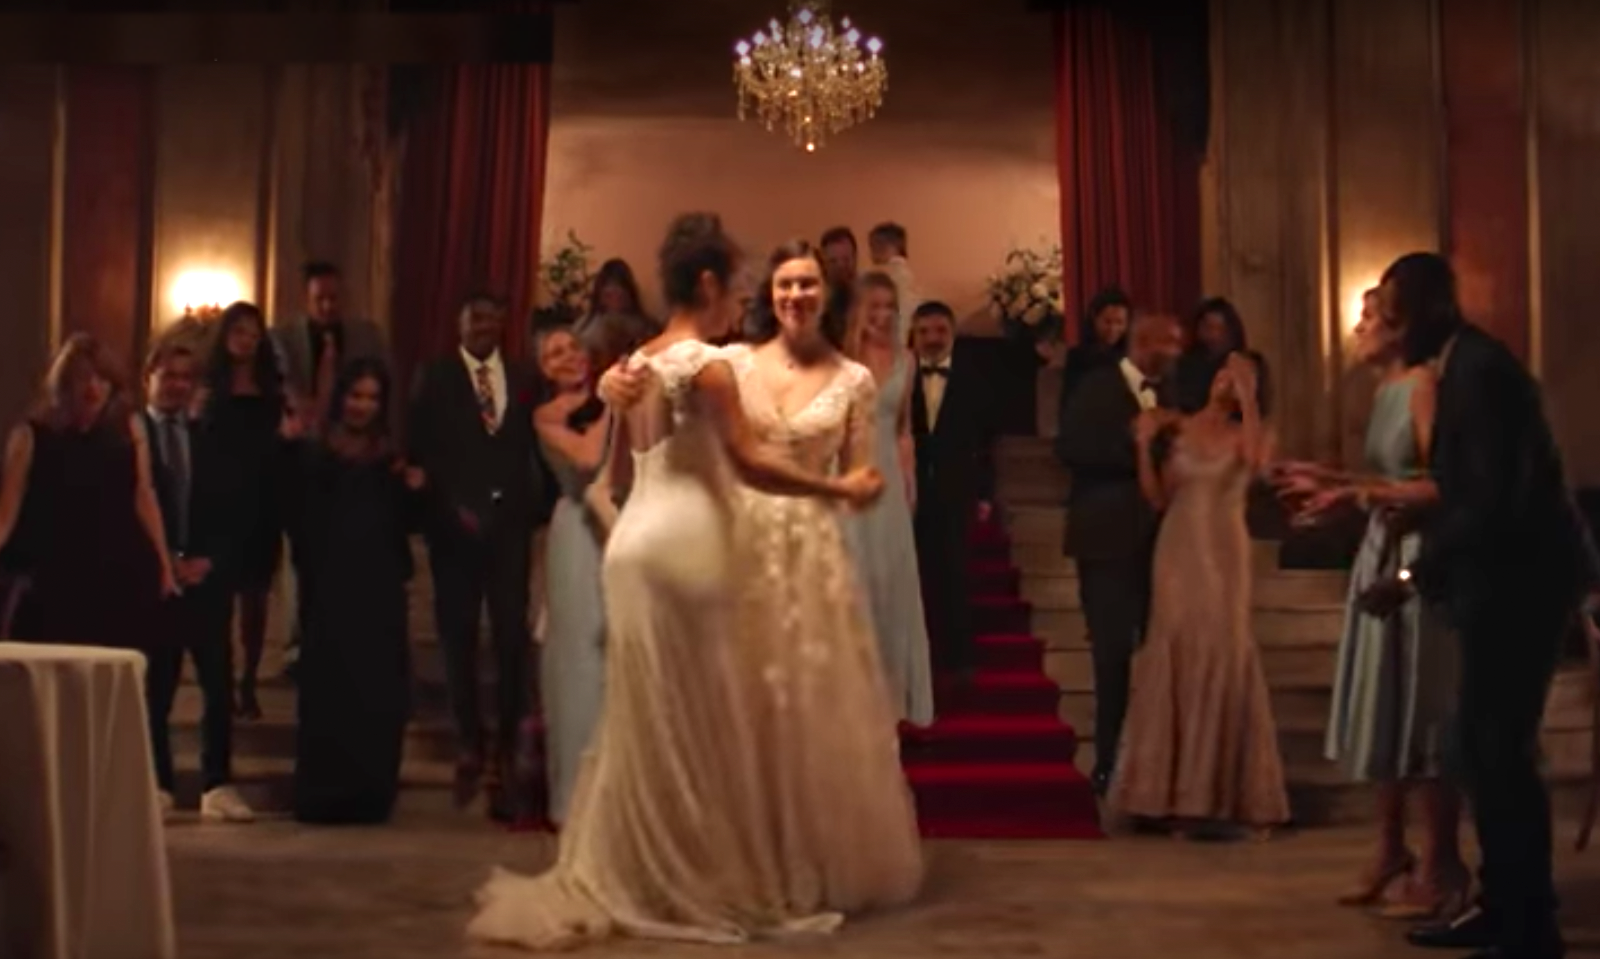 A First: David’s Bridal Features Lesbian Couple in New Ad